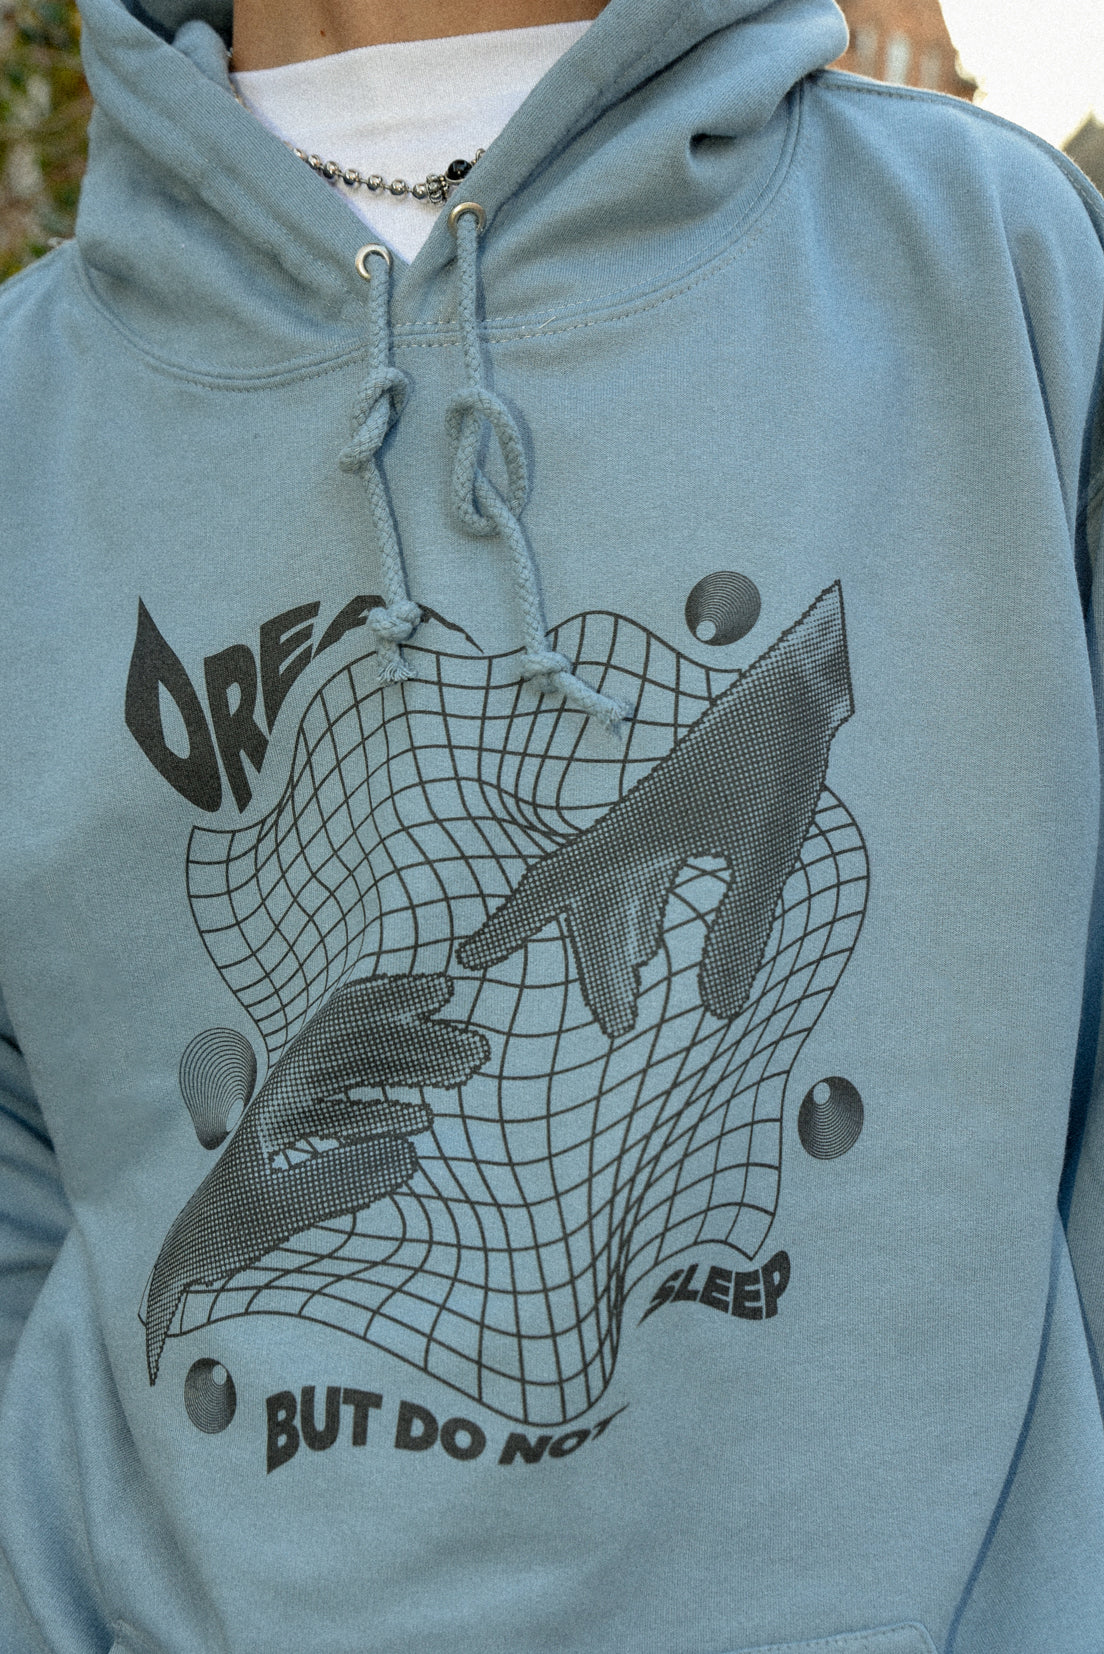 Hoodie in Dusty Blue with Sci Fi Rave Hands Print